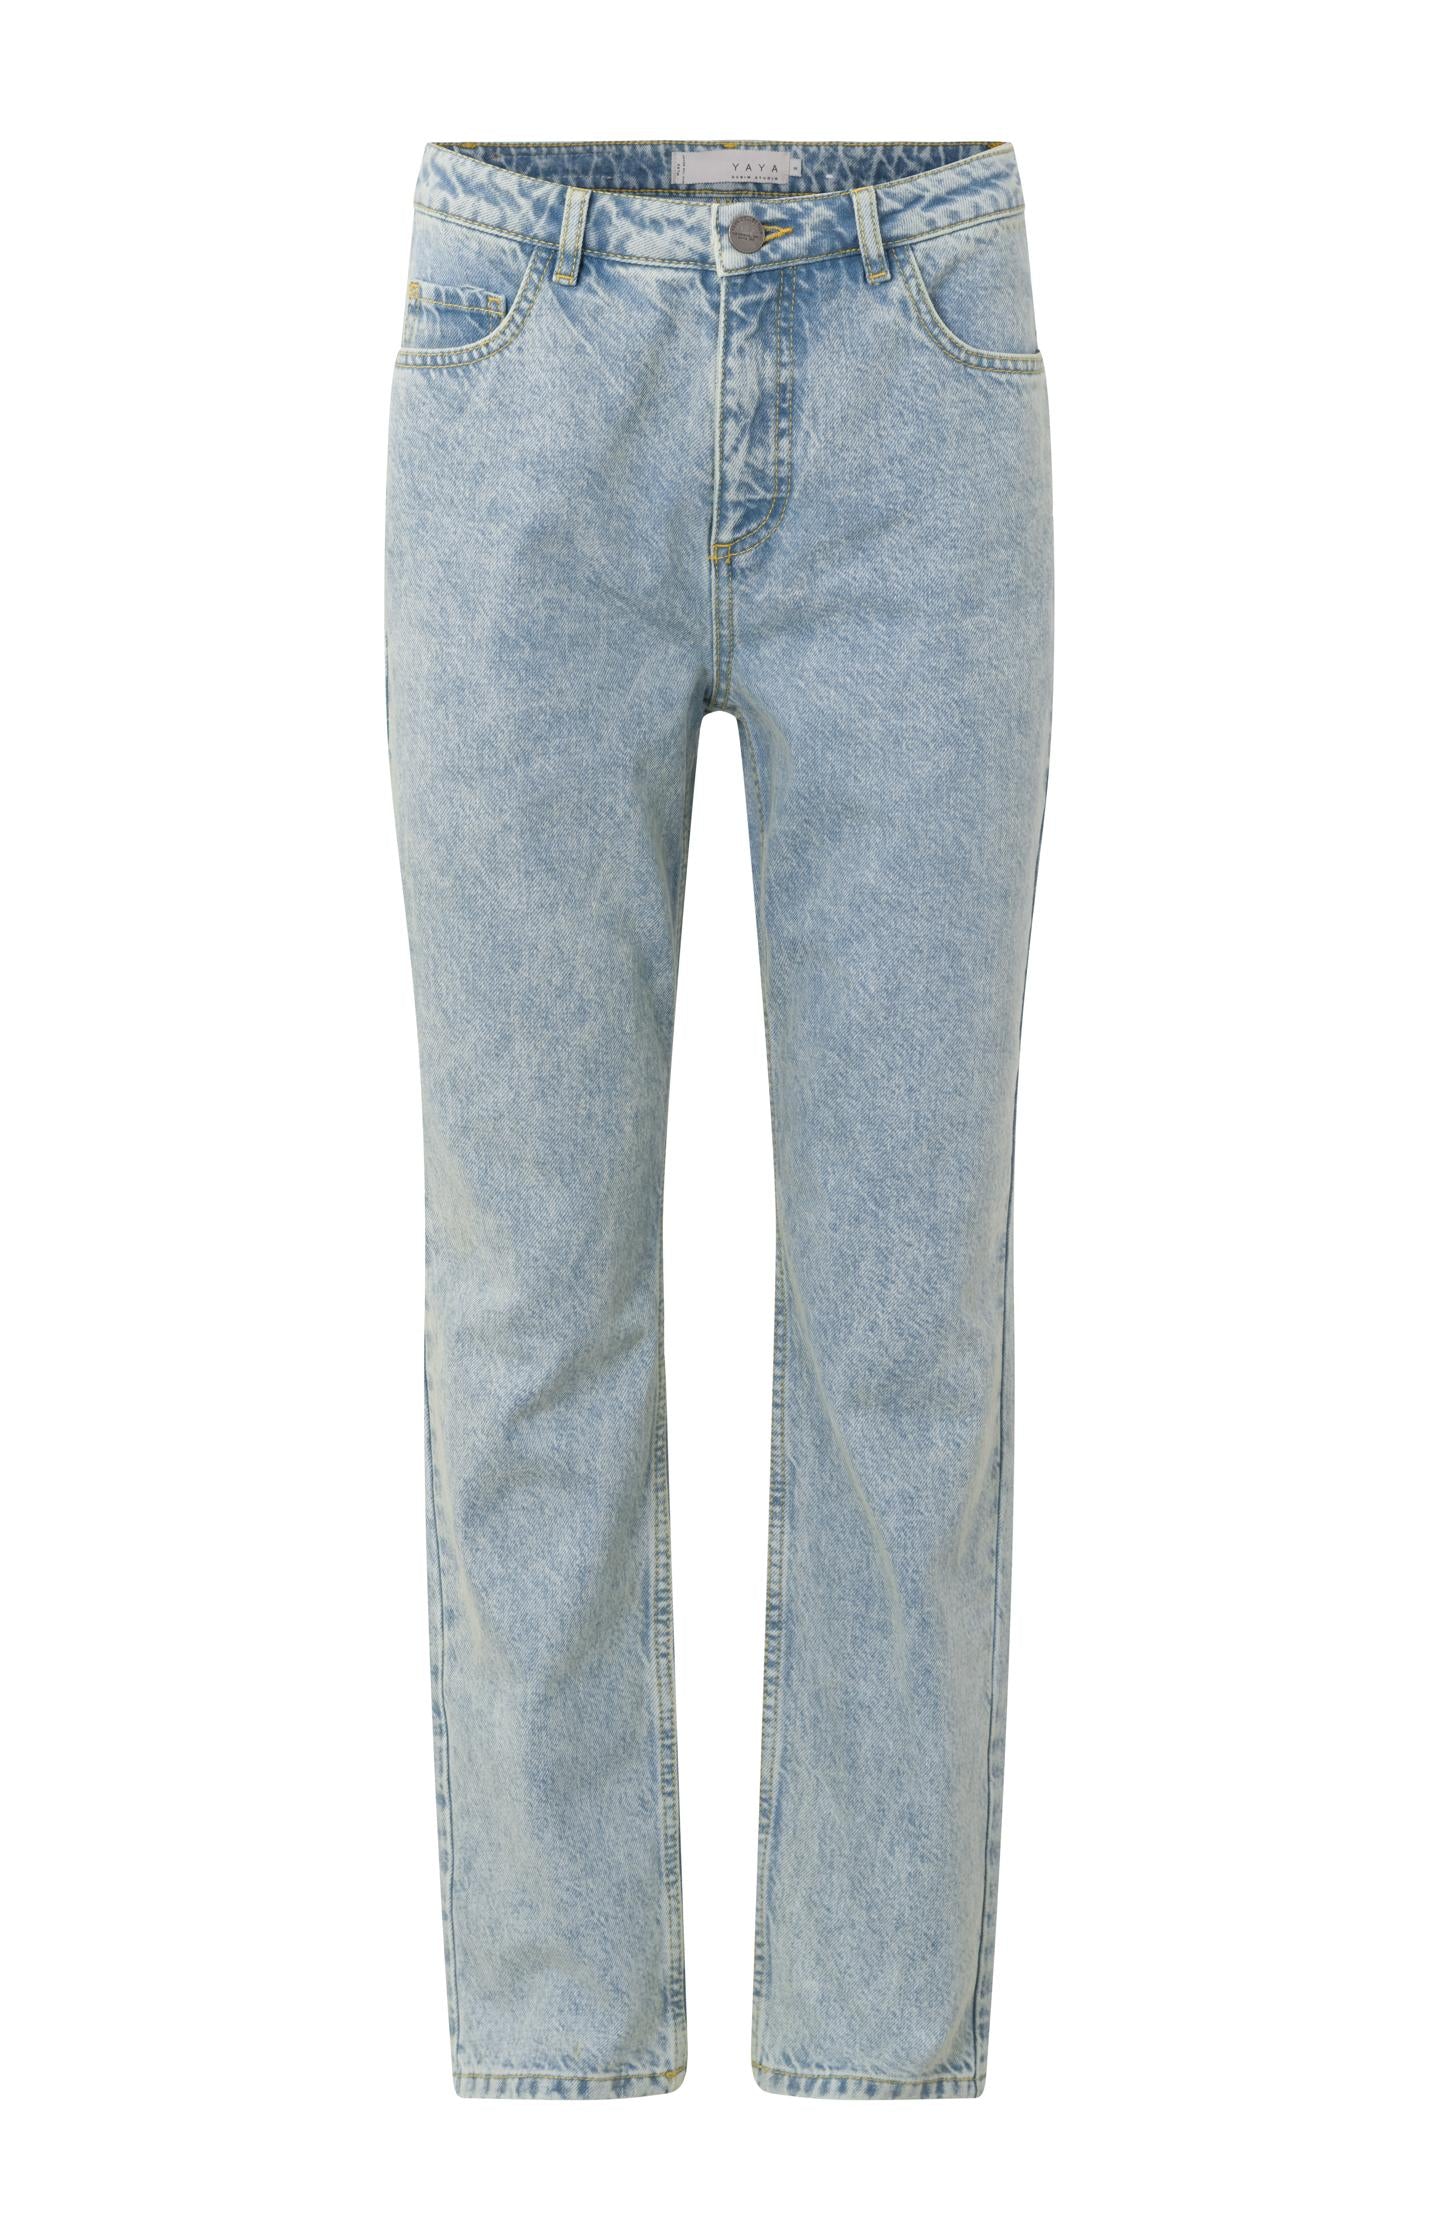 Boyfriend non stretch denim with 5 pocket style and zip fly - Type: product